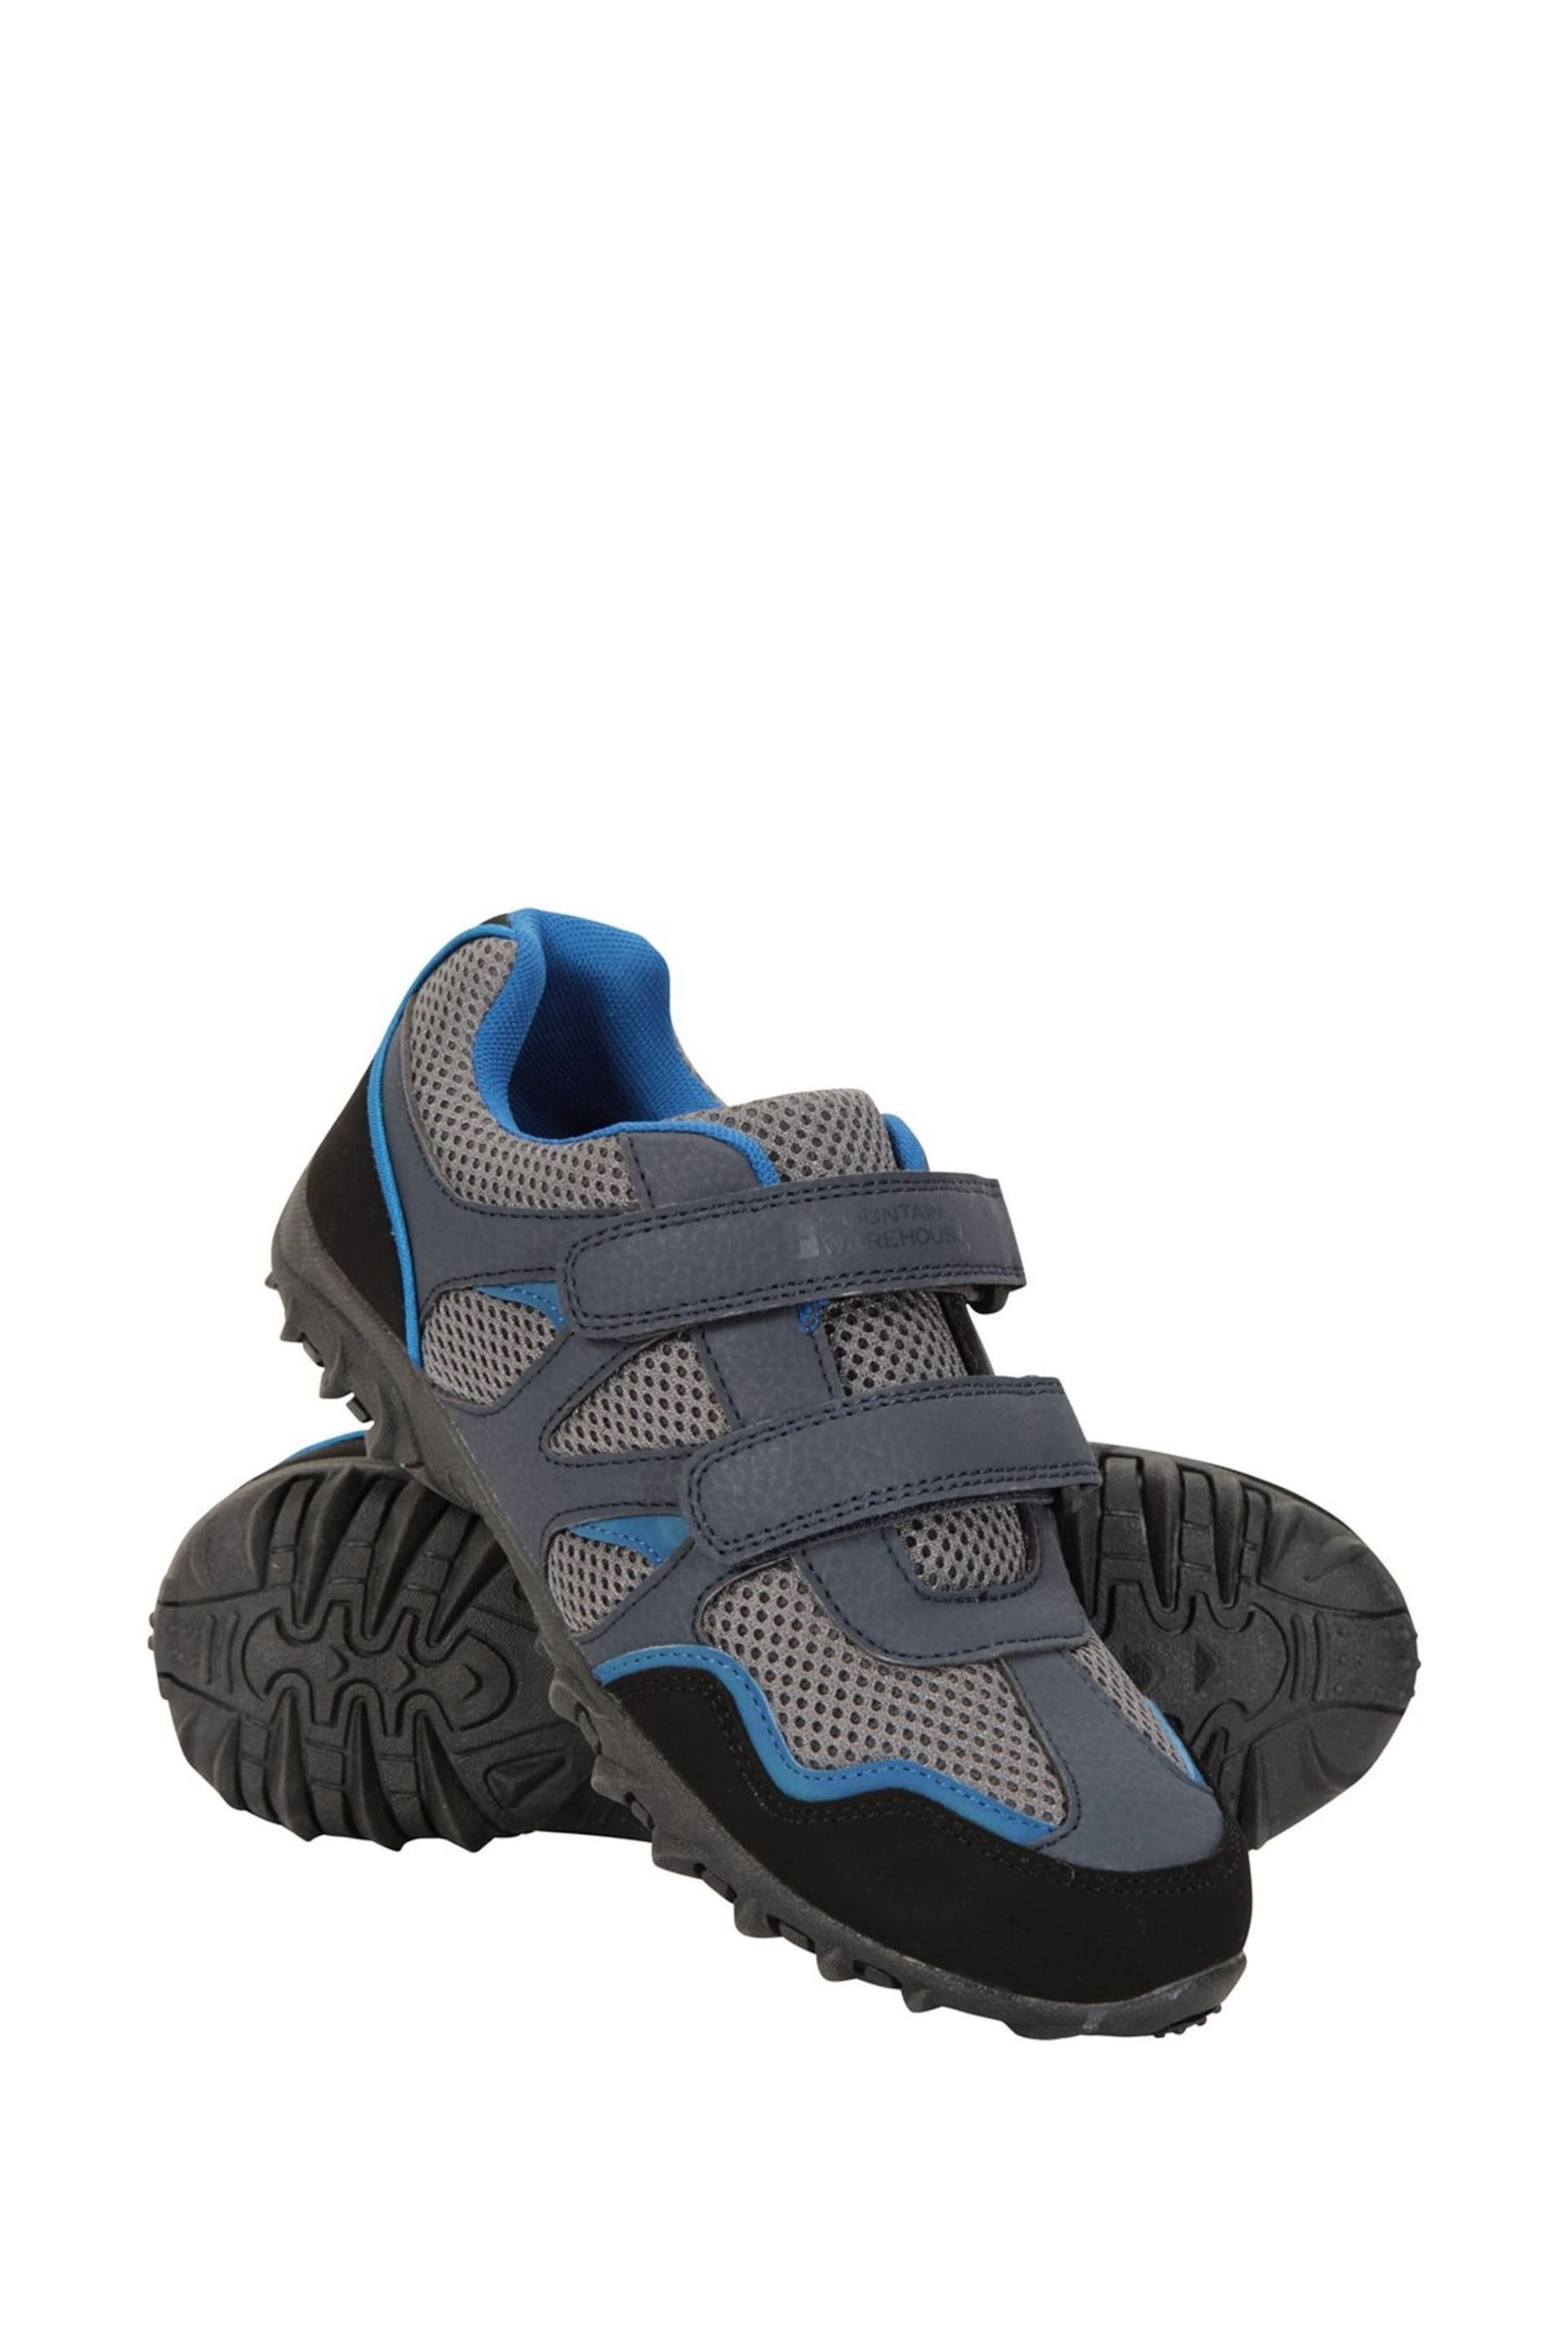 Mountain Warehouse Navy Mars Kids NonMarking Trainers - Image 1 of 4